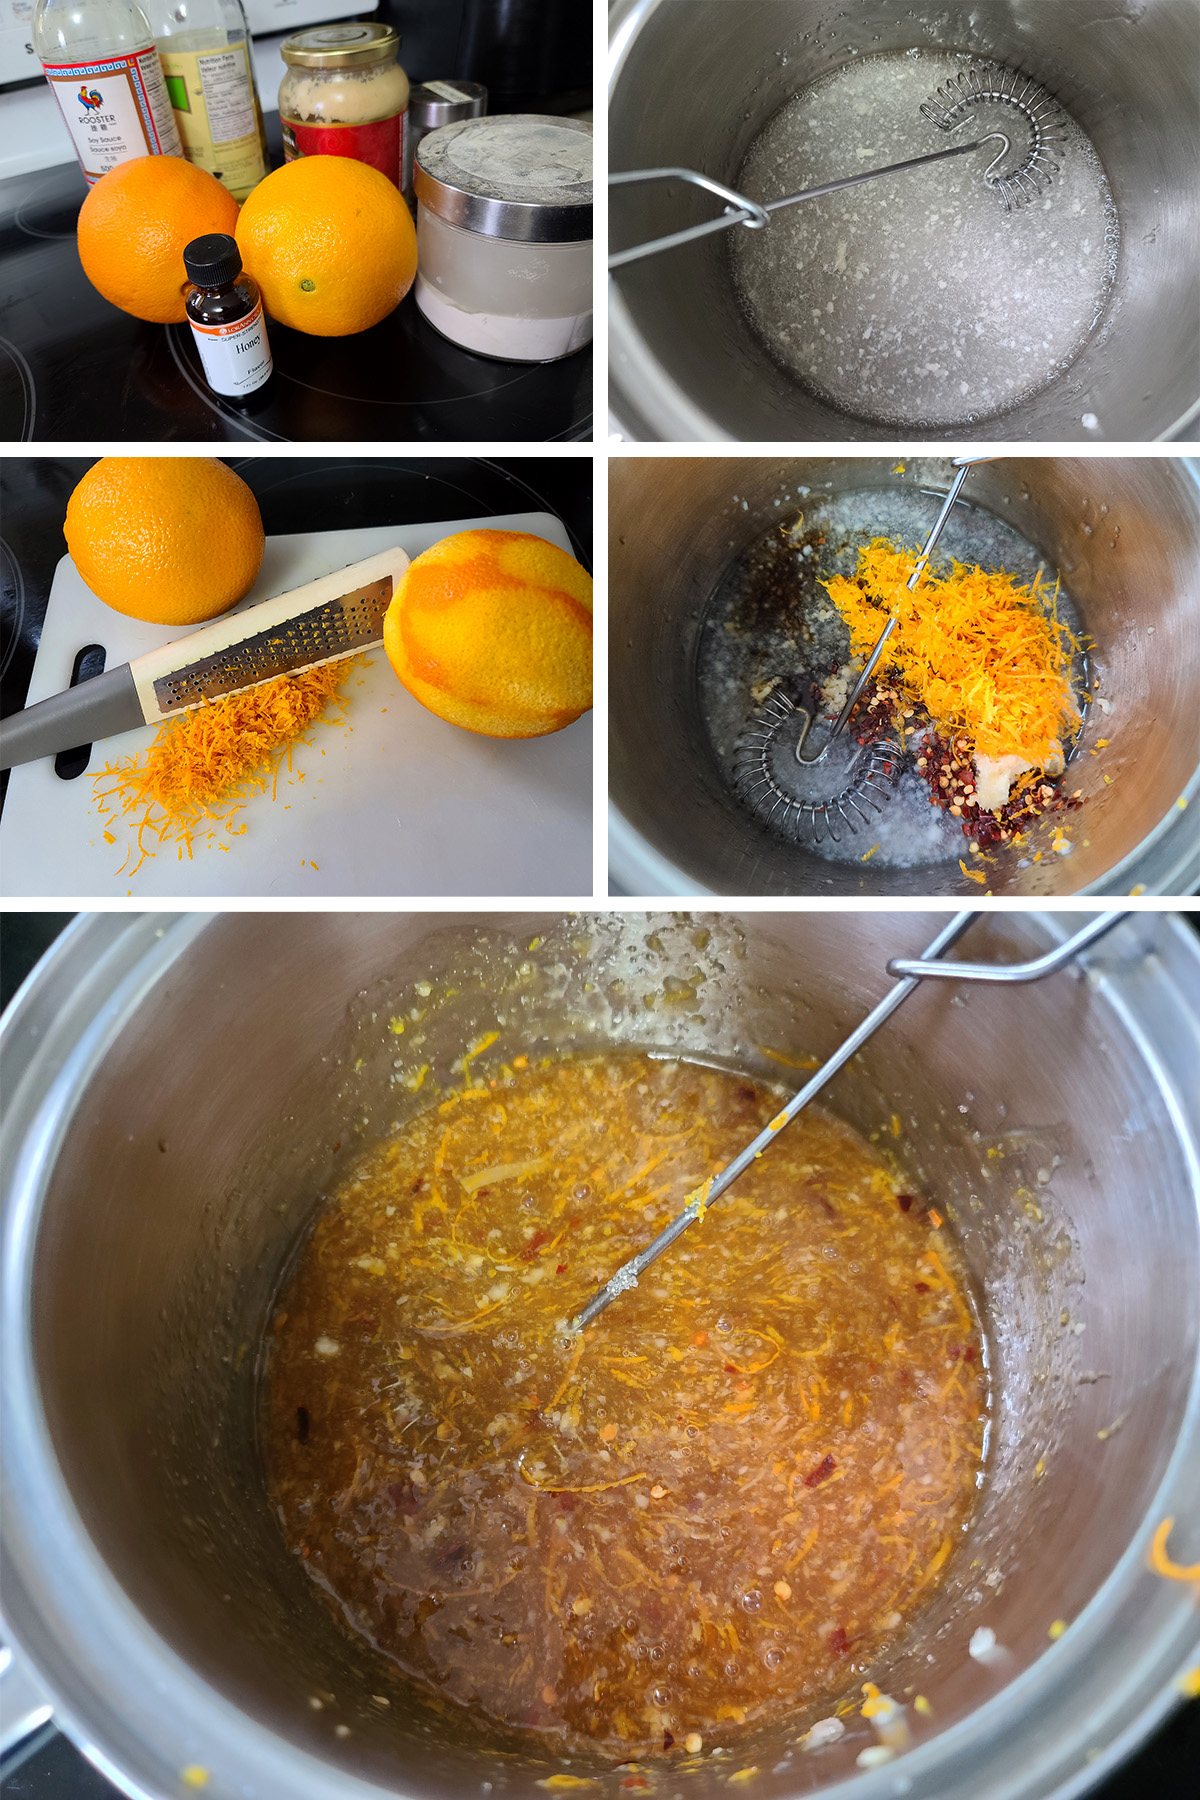 A 5 part image showing the sauce being mixed together, as described.